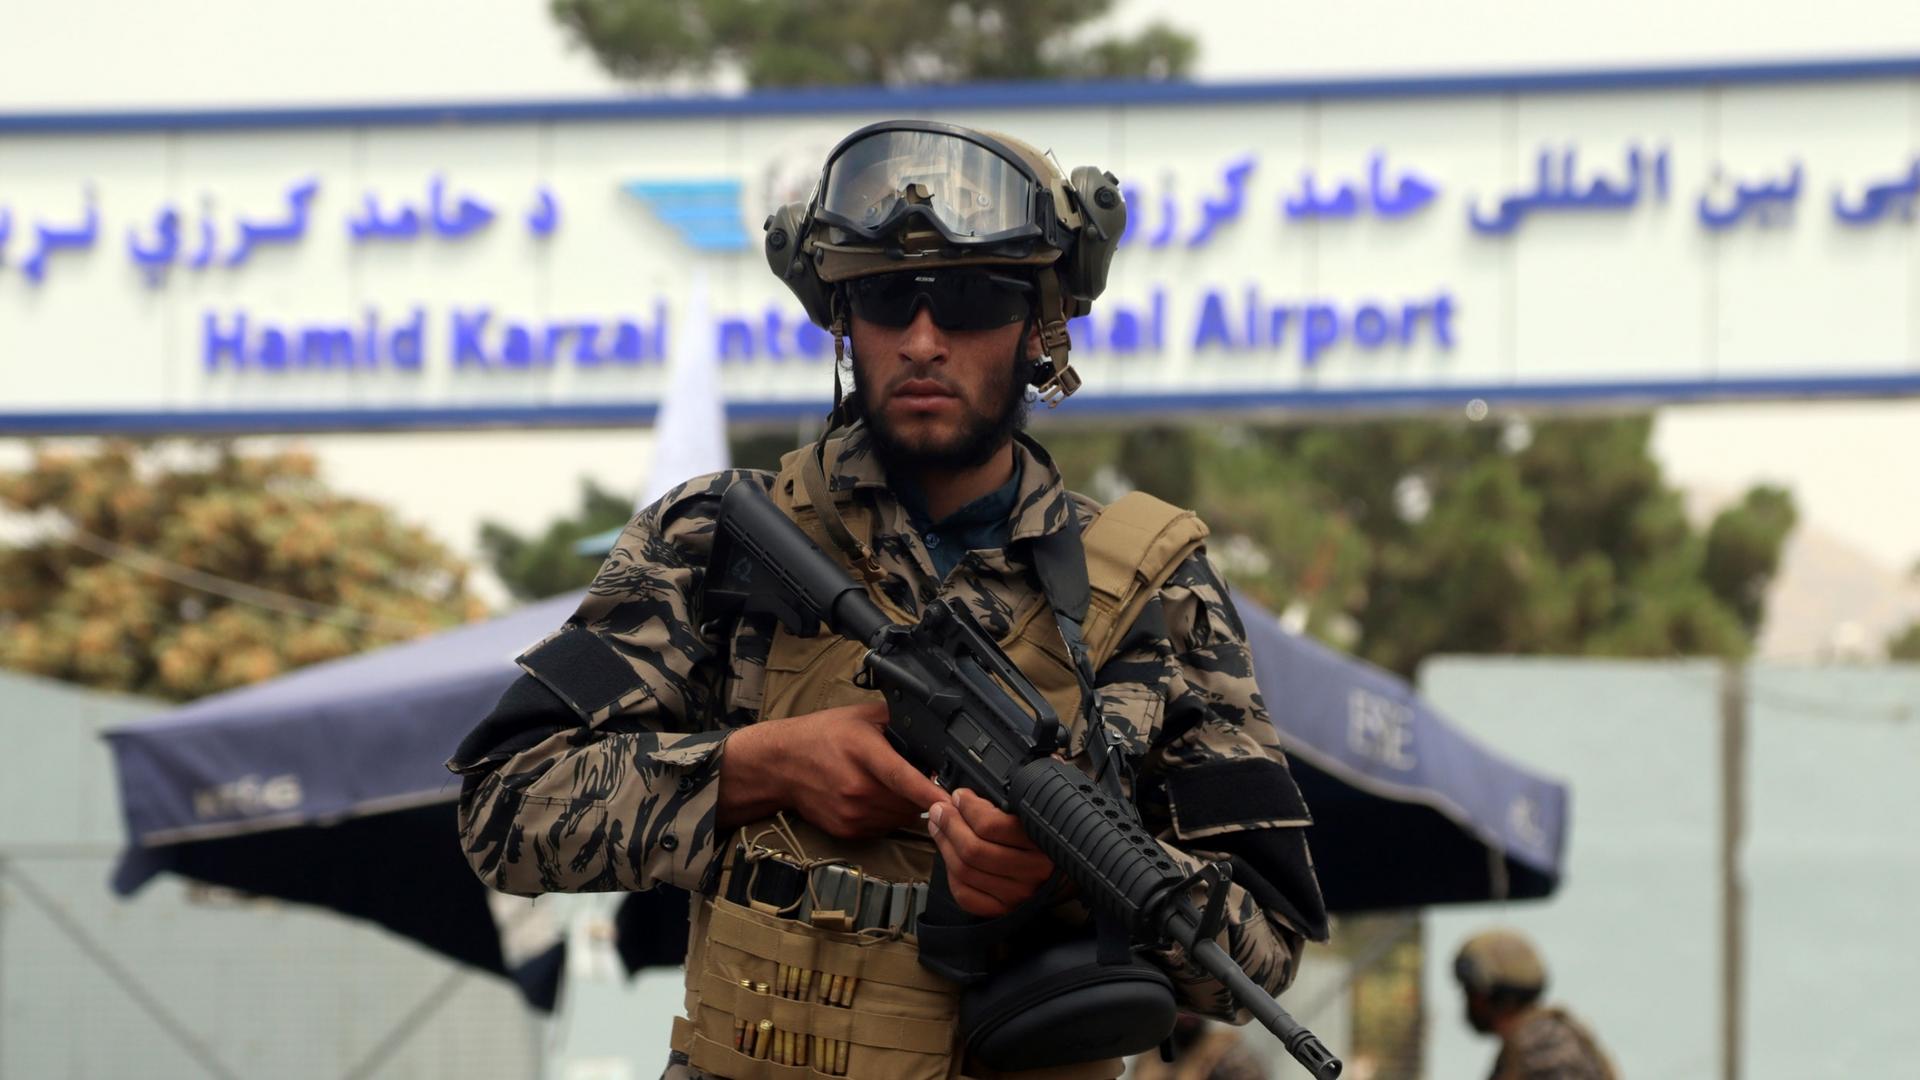 Taliban special force fighters stand guard outside the Hamid Karzai International Airport after the US military's withdrawal, in Kabul, Afghanistan, Tuesday, Aug. 31, 2021. 